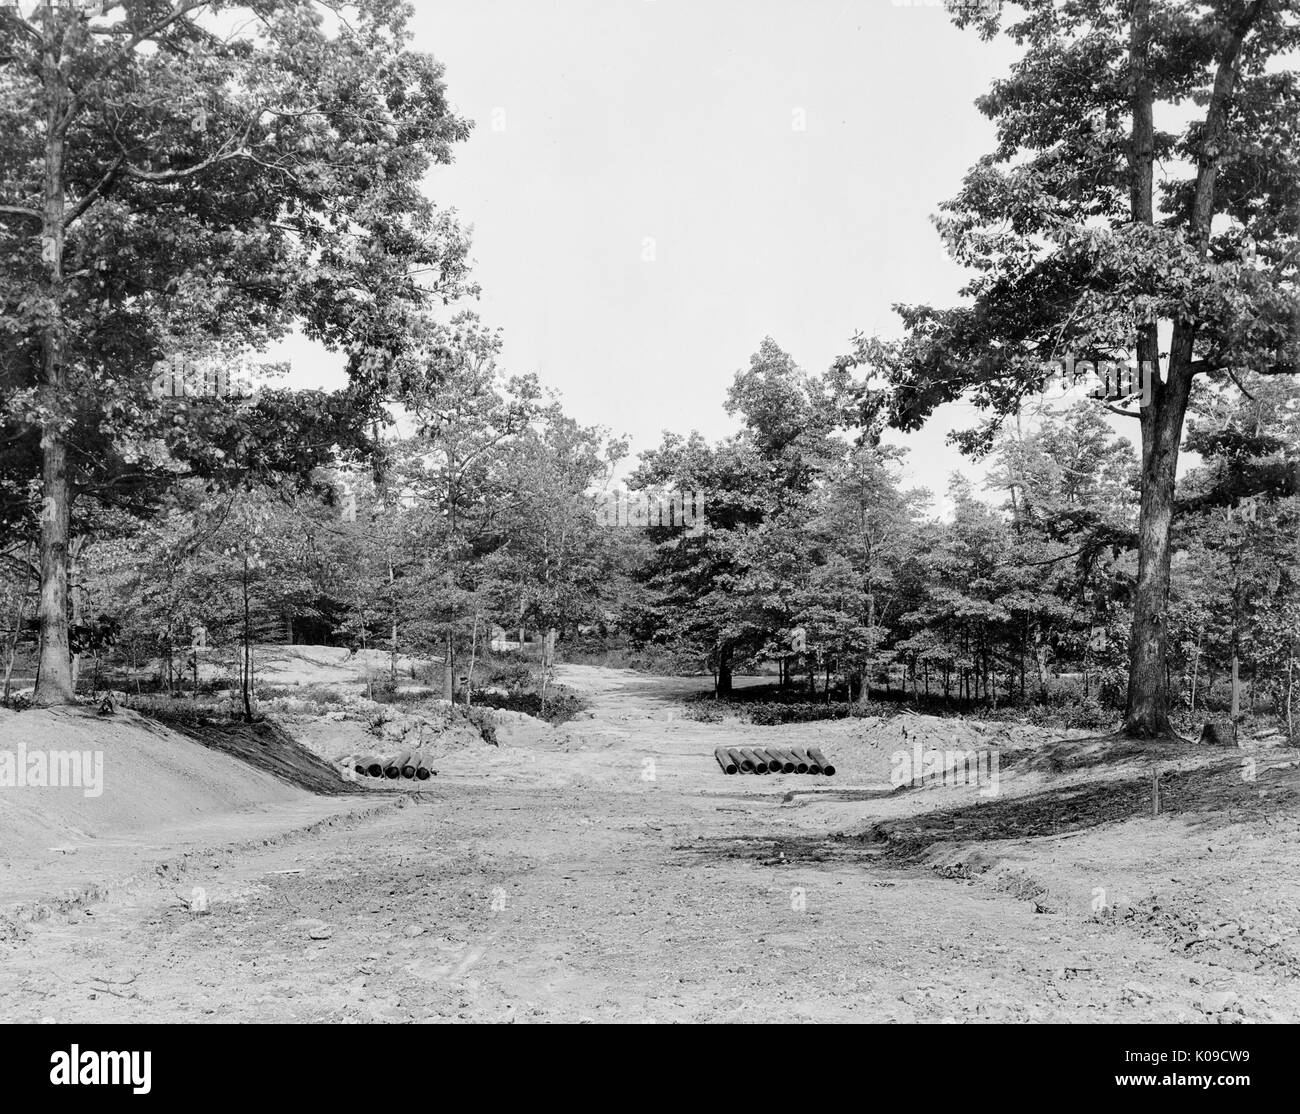 View of a construction site in Baltimore's Northwood neighborhood, the land is elevated in the foreground and declines towards the background, there are rows of utility pipes at the base of the decline and trees border the area, United States, 1950. Stock Photo